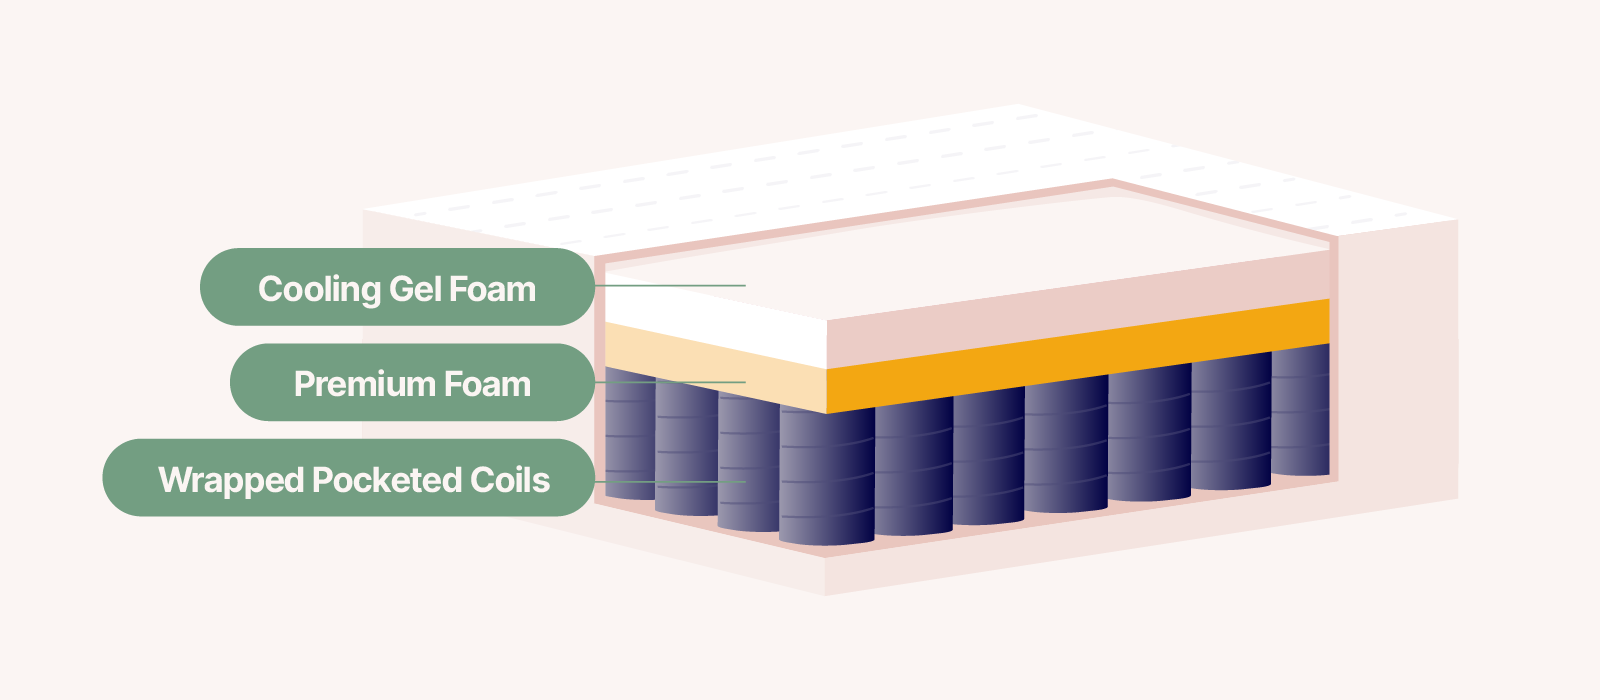 illustration of the inner components of a hybrid mattress based on the Logan and Cove mattress composition three layers within the mattress are shown text indicates that the top layer of the mattress is cooling gel foam the middle layer is premium foam and the base layer is wrapped pocketed coils